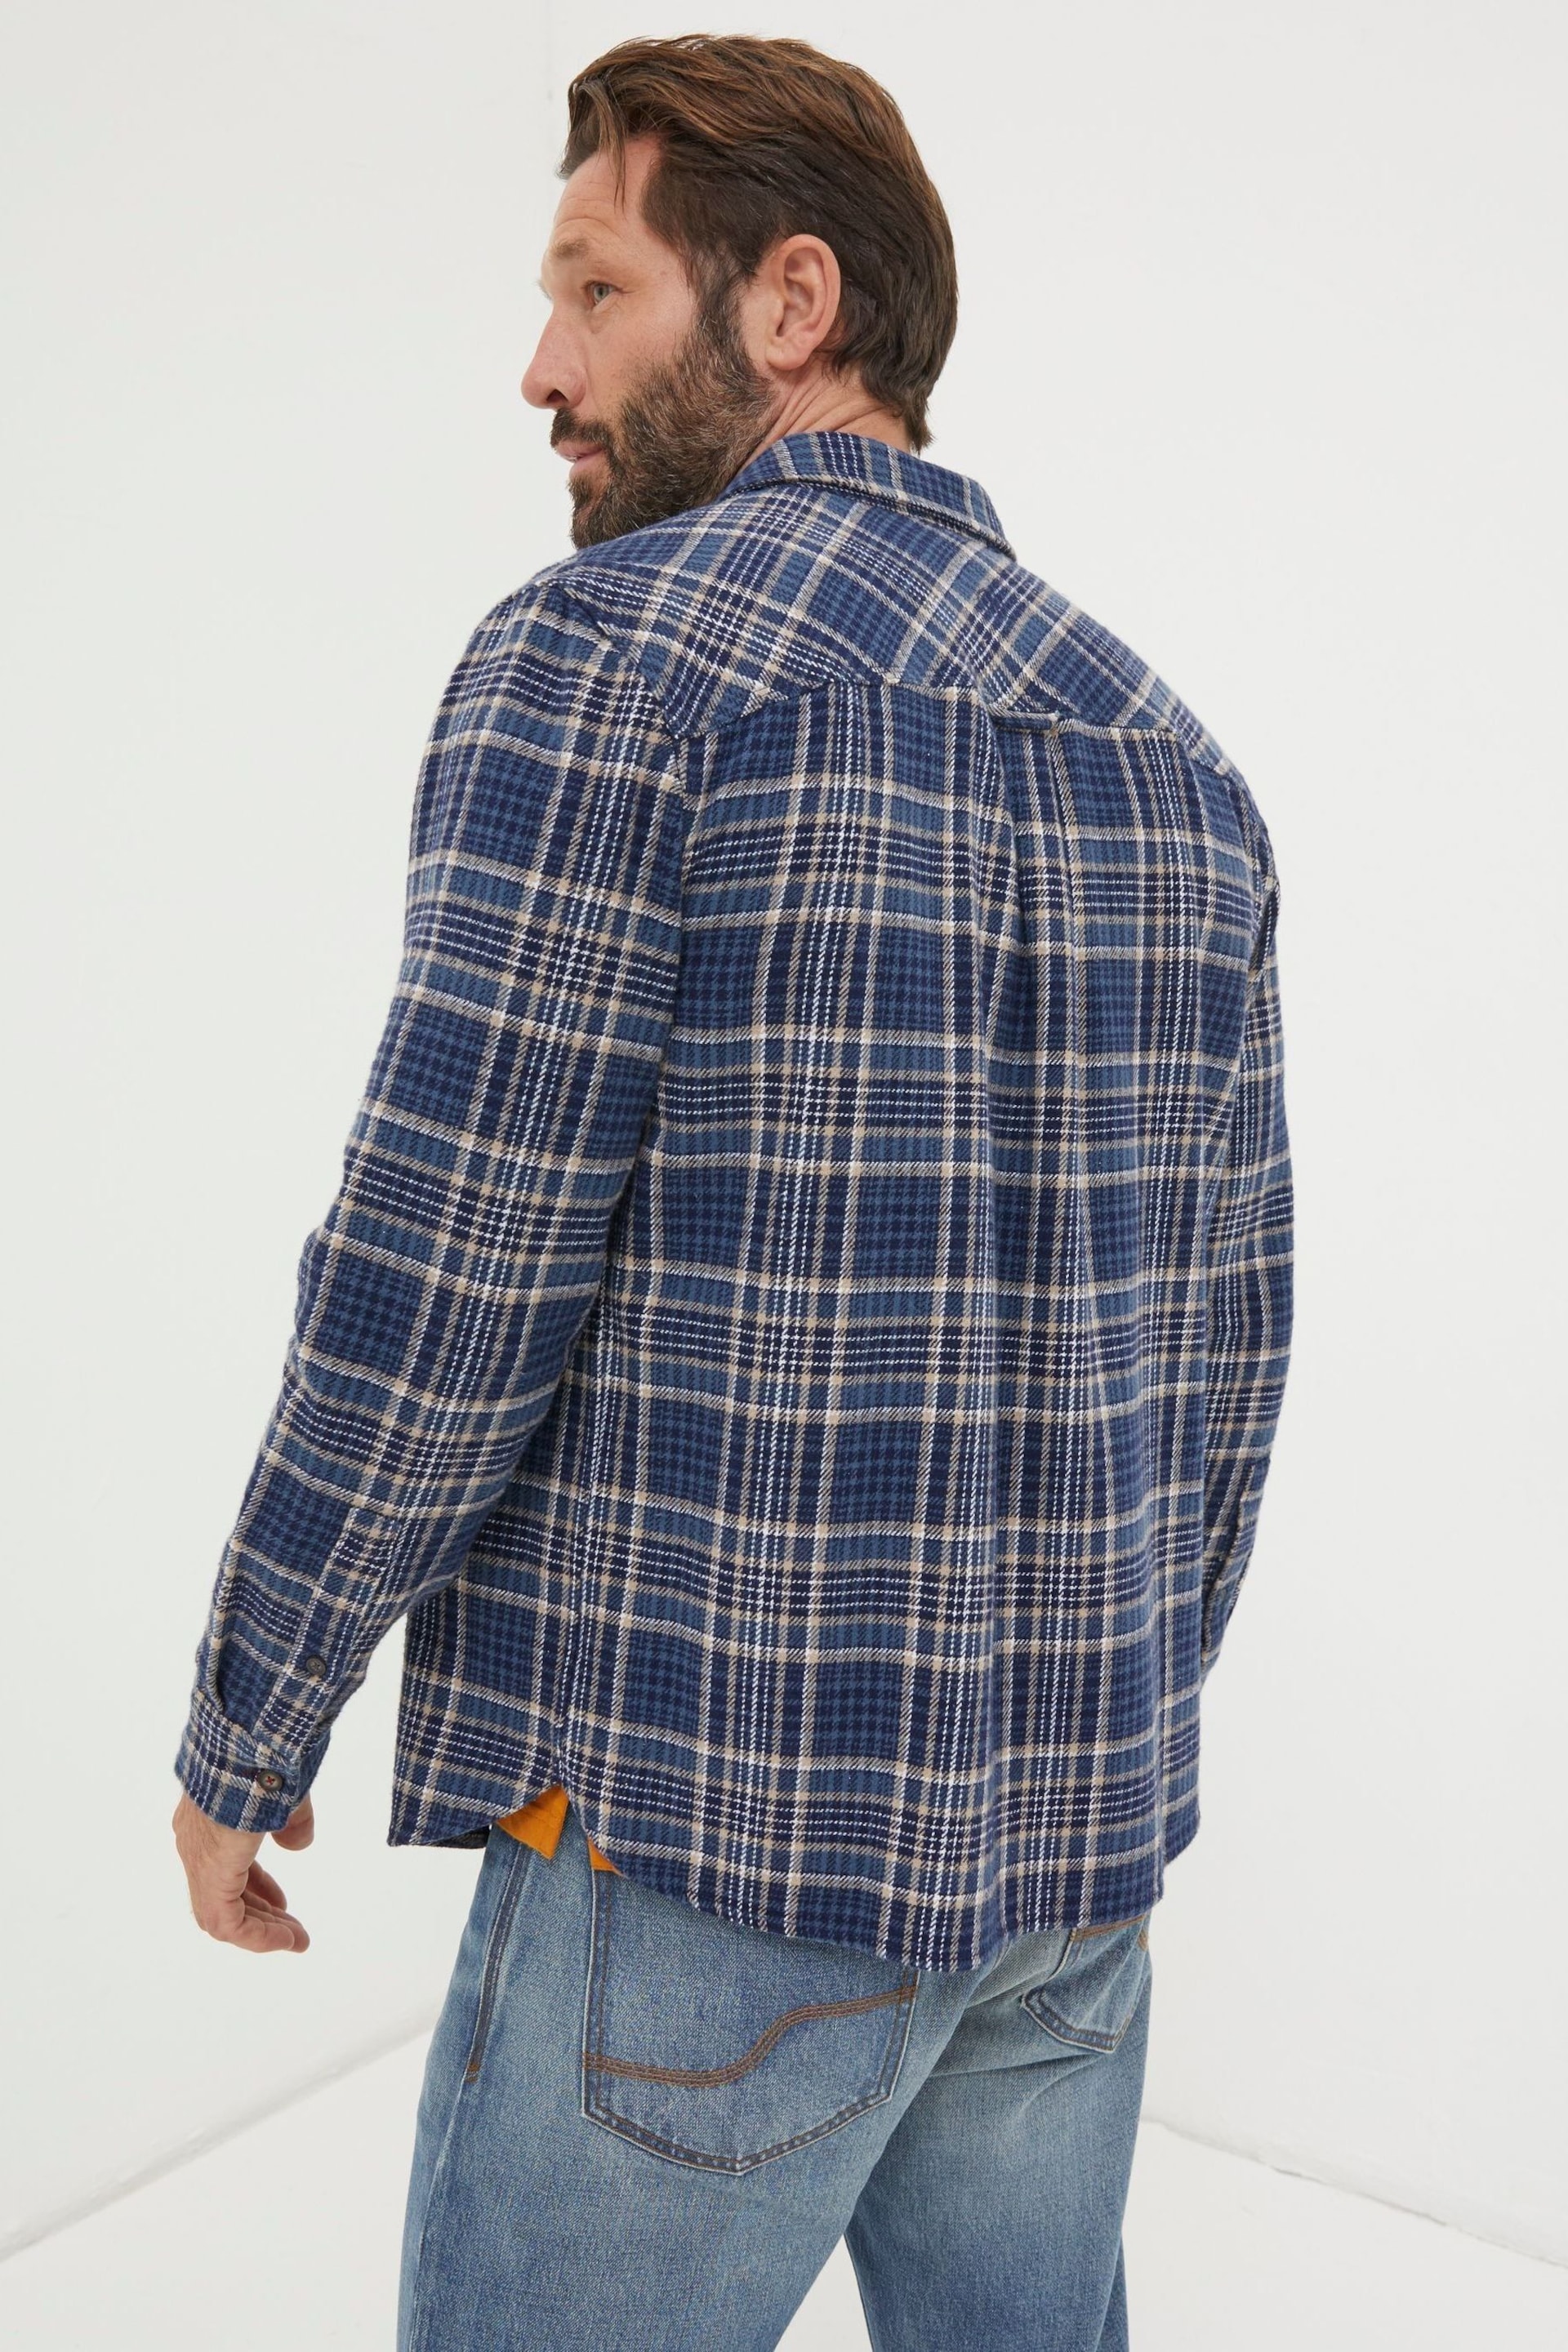 FatFace Blue Selsey Check Shirt - Image 3 of 5